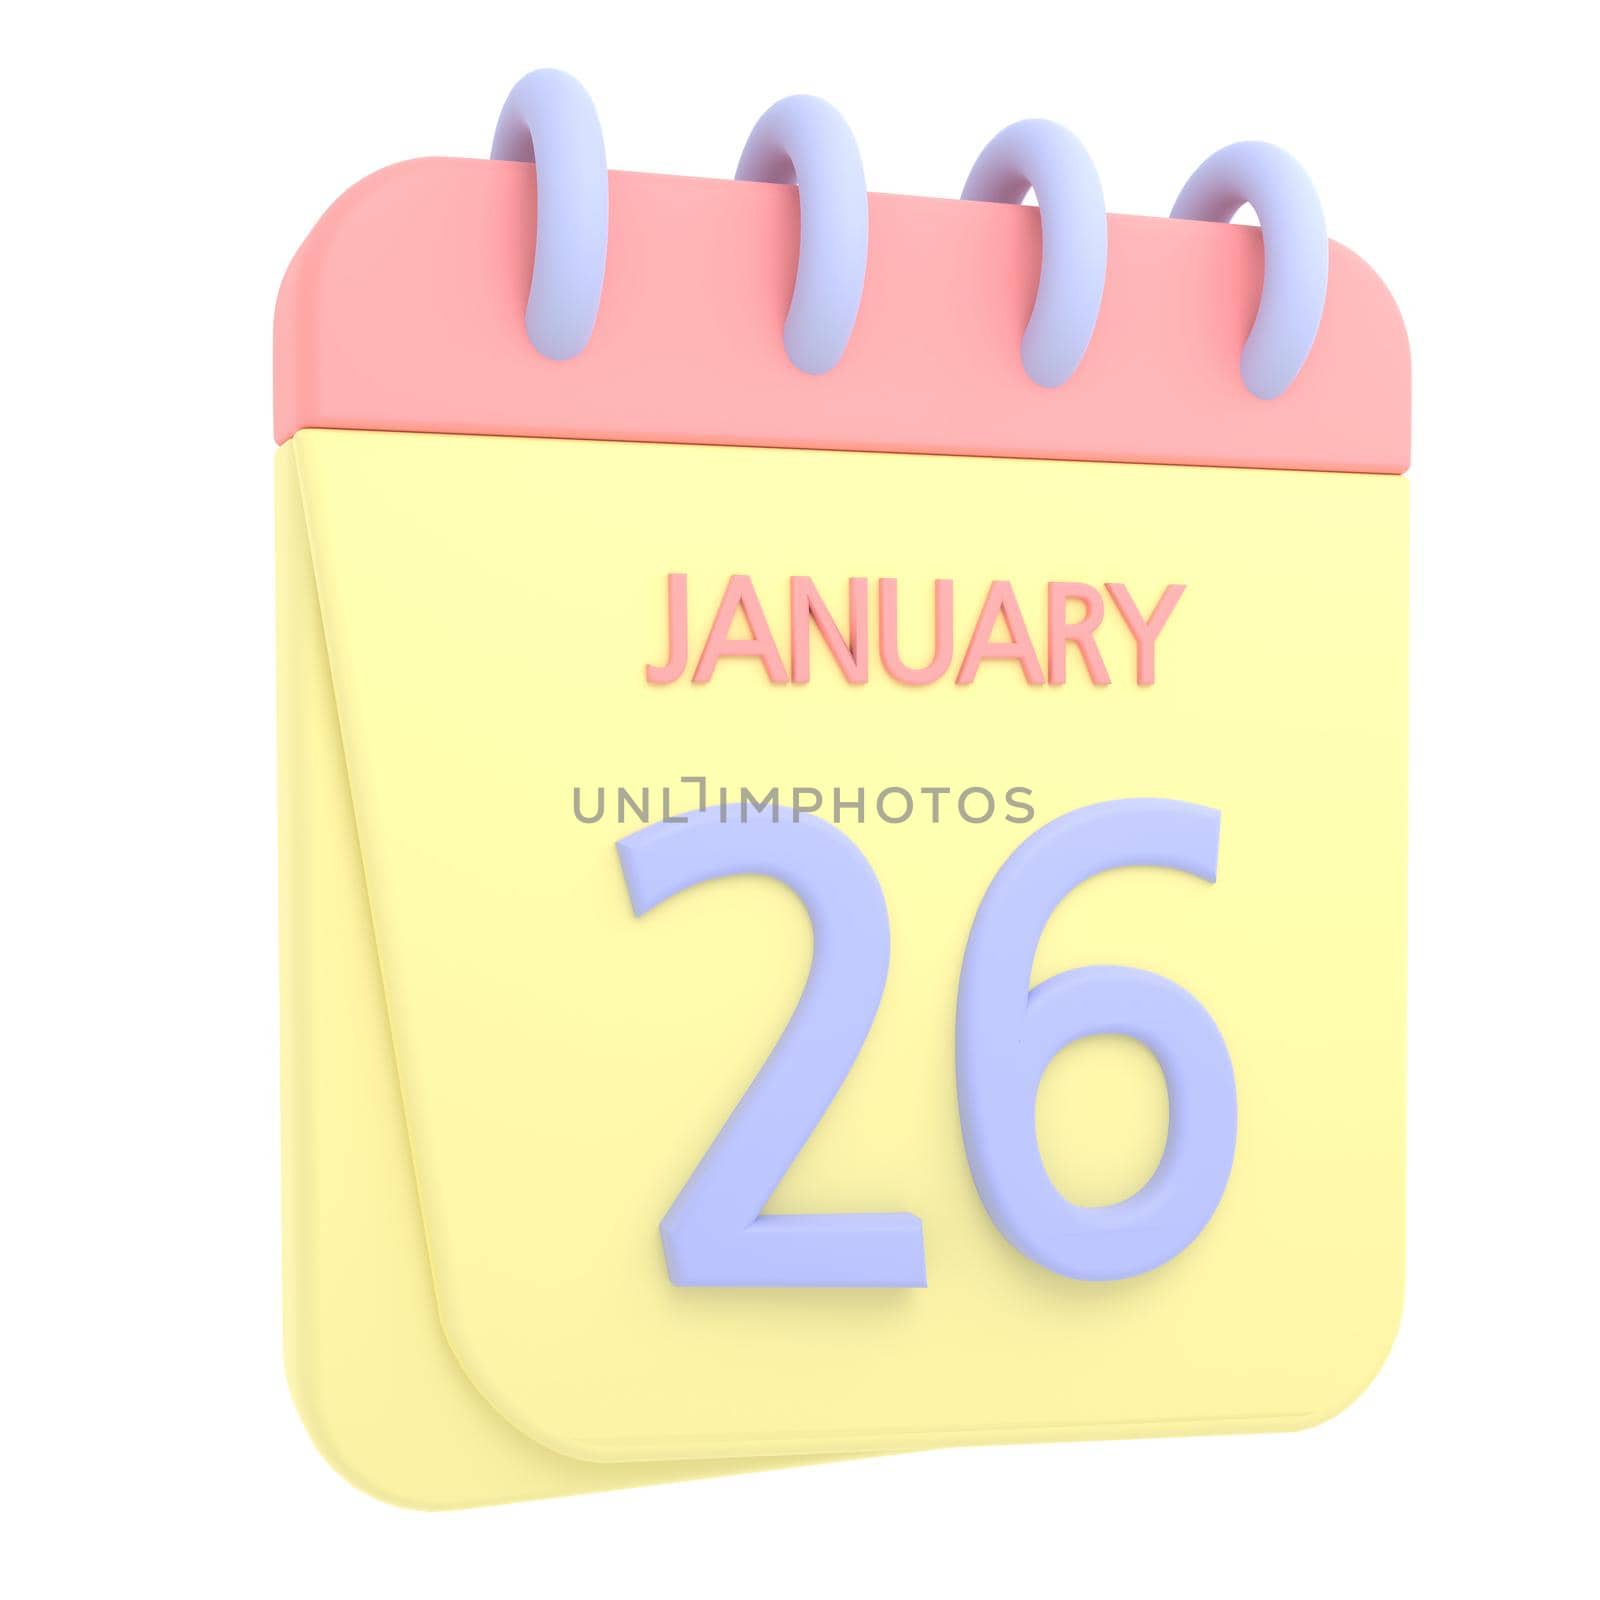 26th January 3D calendar icon. Web style. High resolution image. White background